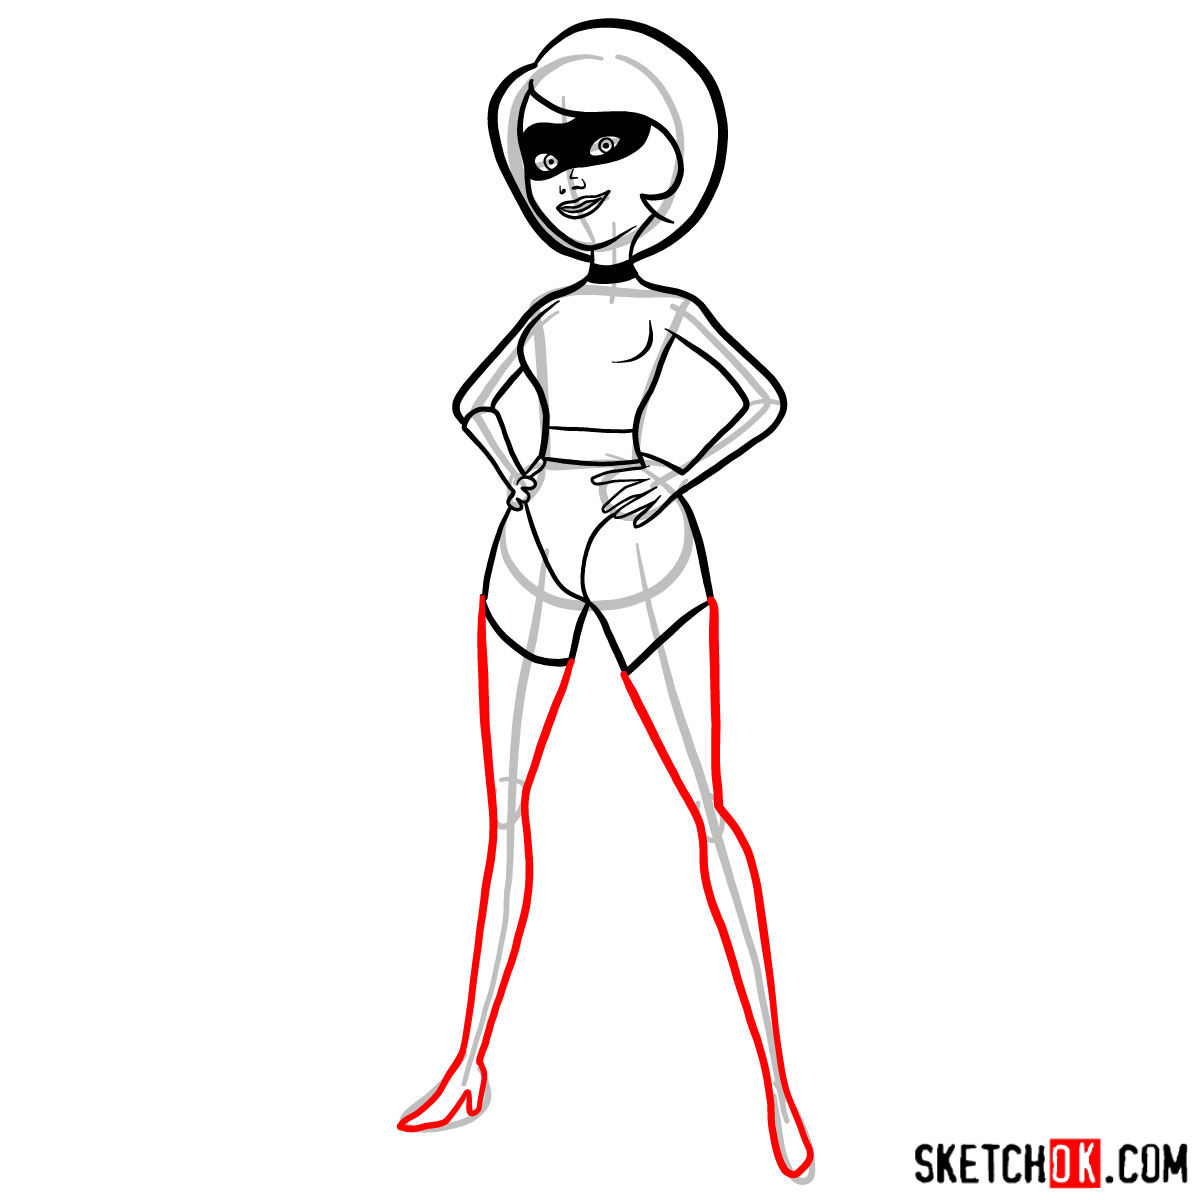 How to draw Elastigirl from The Incredibles - step 10